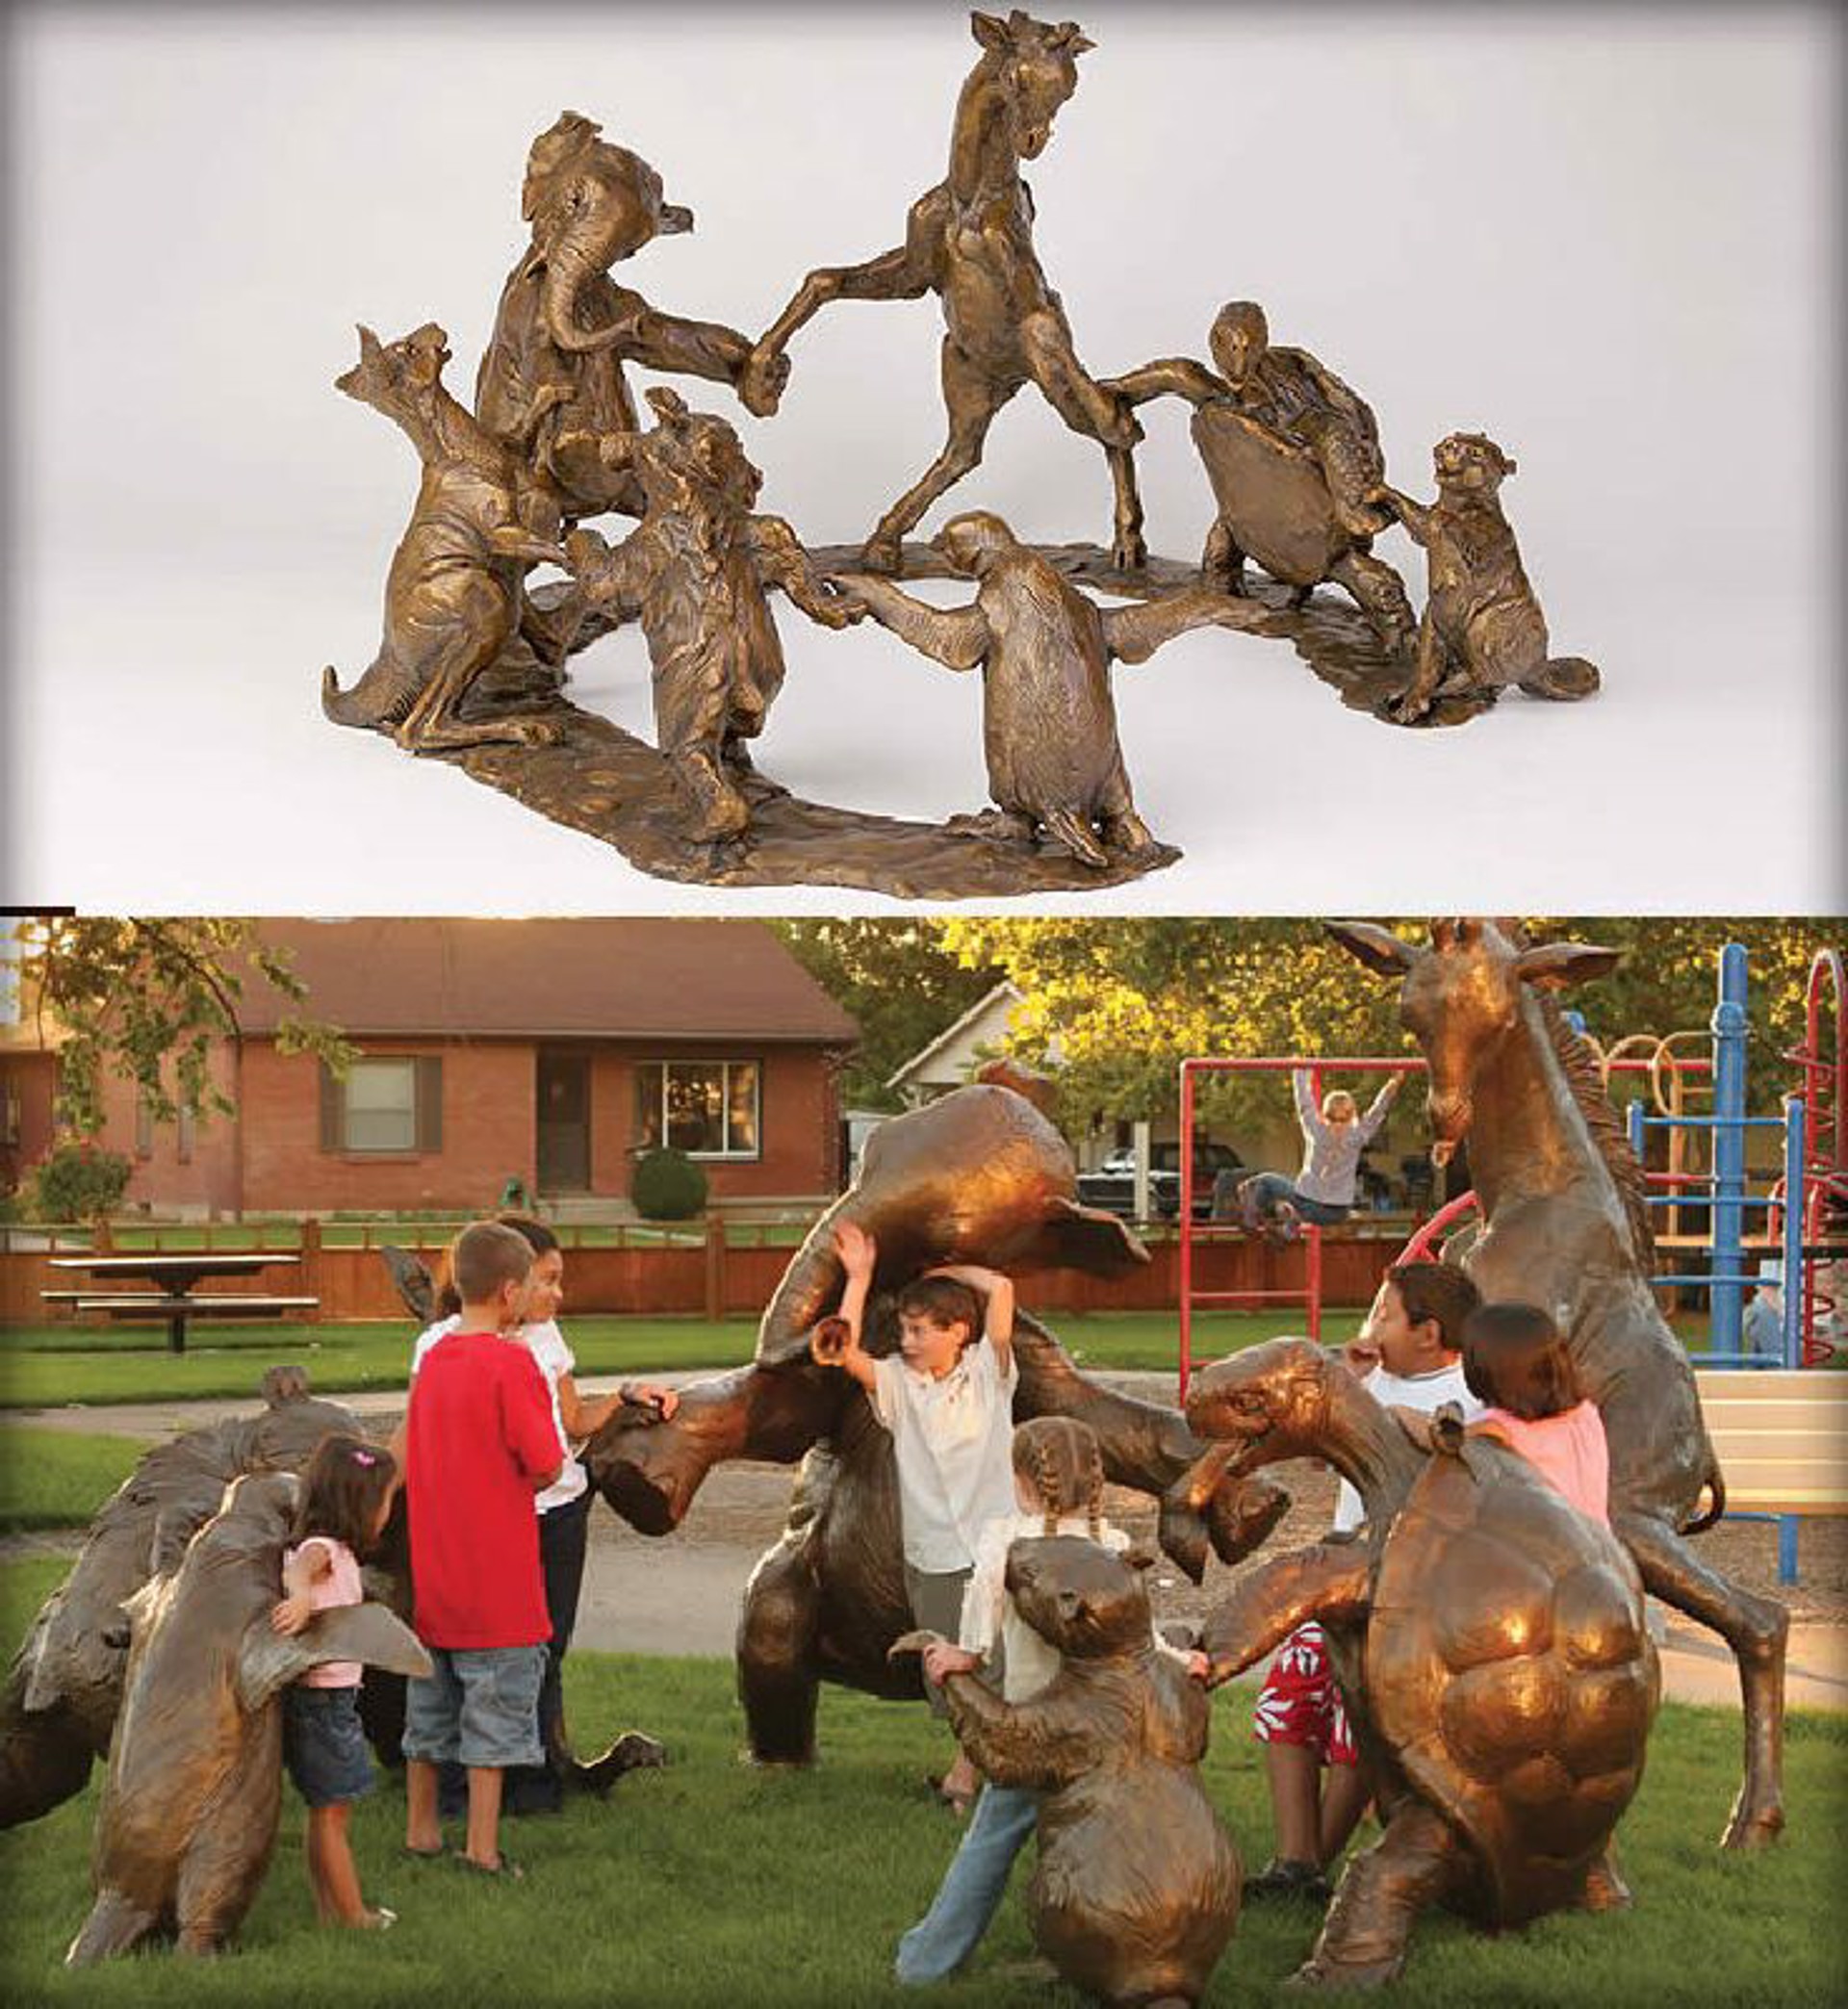 Circle of Friends by Gary Lee Price (sculptor)